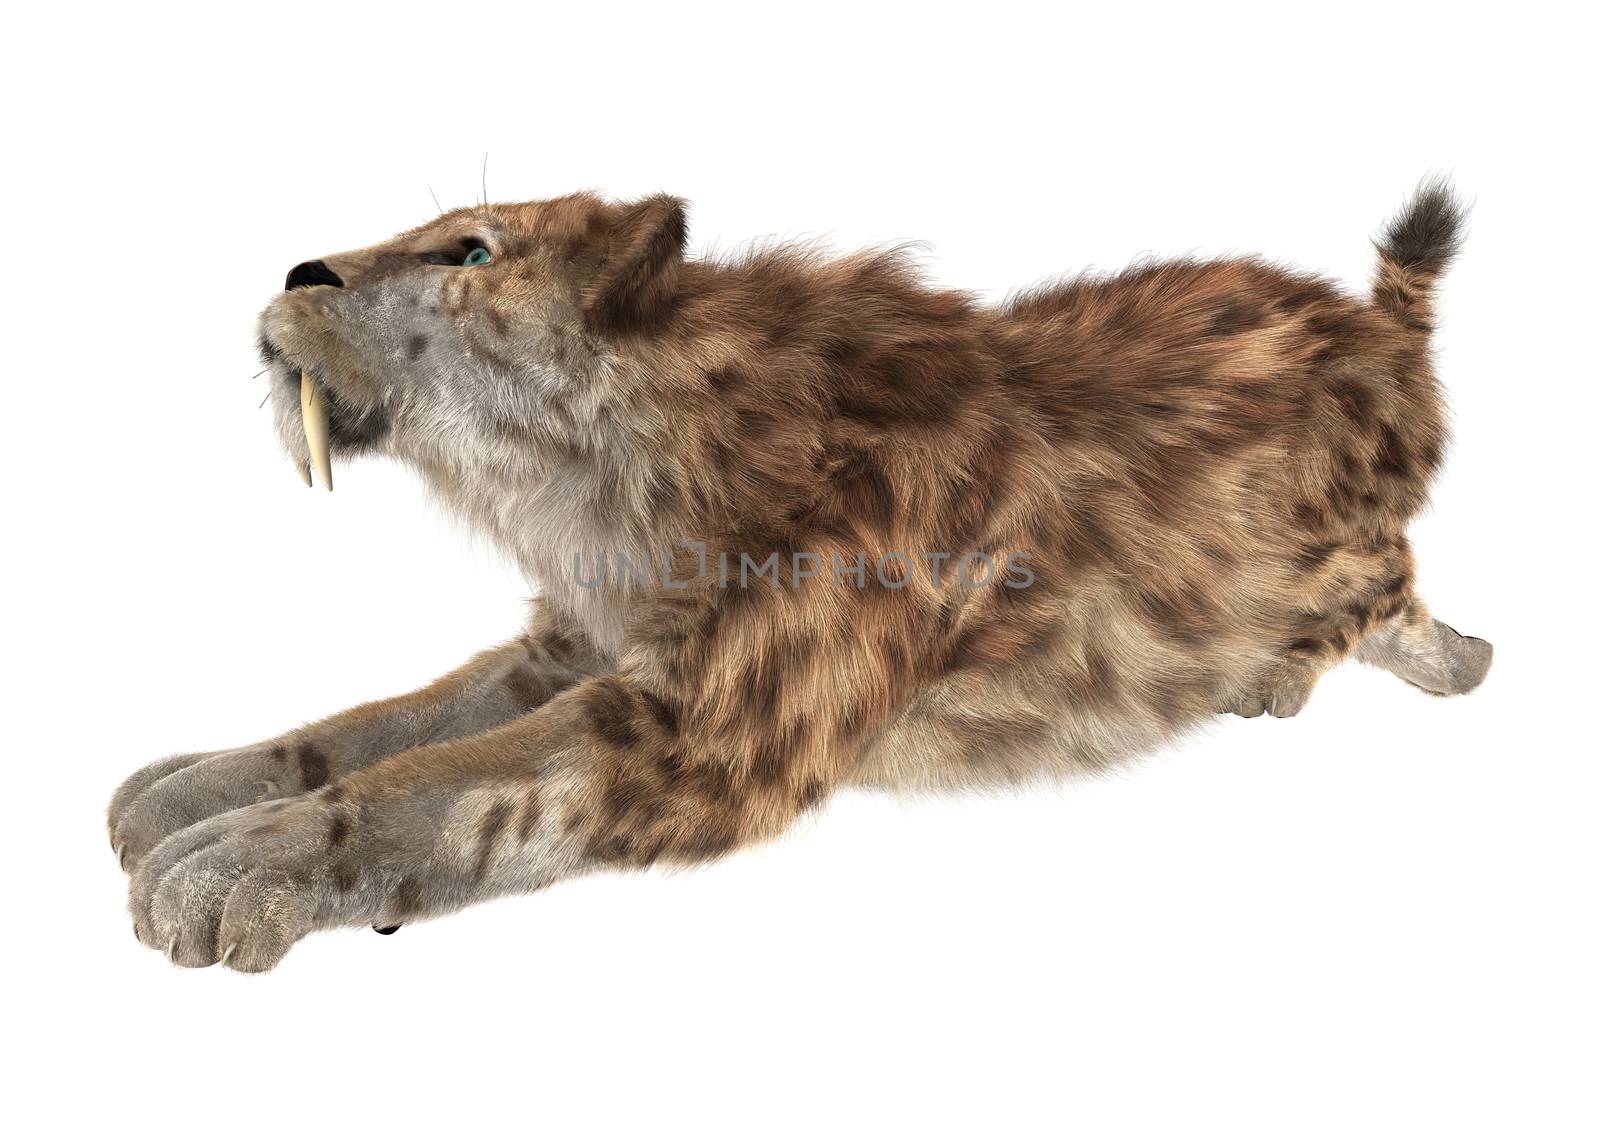 3D digital render of a smilodon or a saber toothed cat isolated on white background